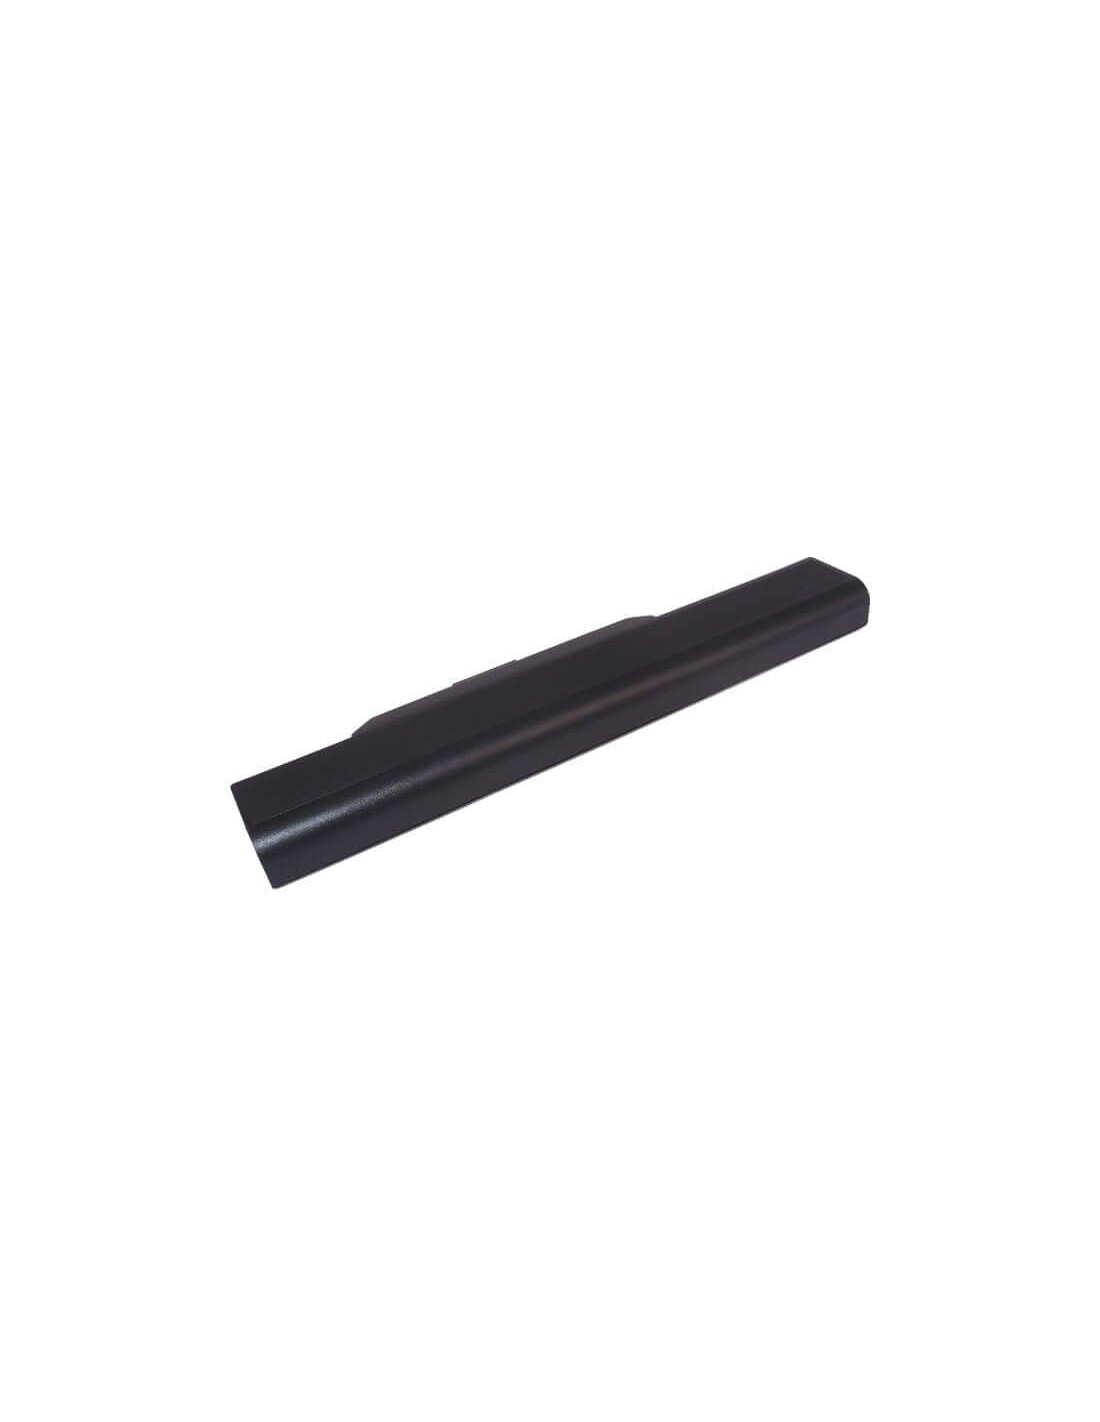 Black Battery for Asus A53b, A53by, A53e 11.1V, 4400mAh - 48.84Wh